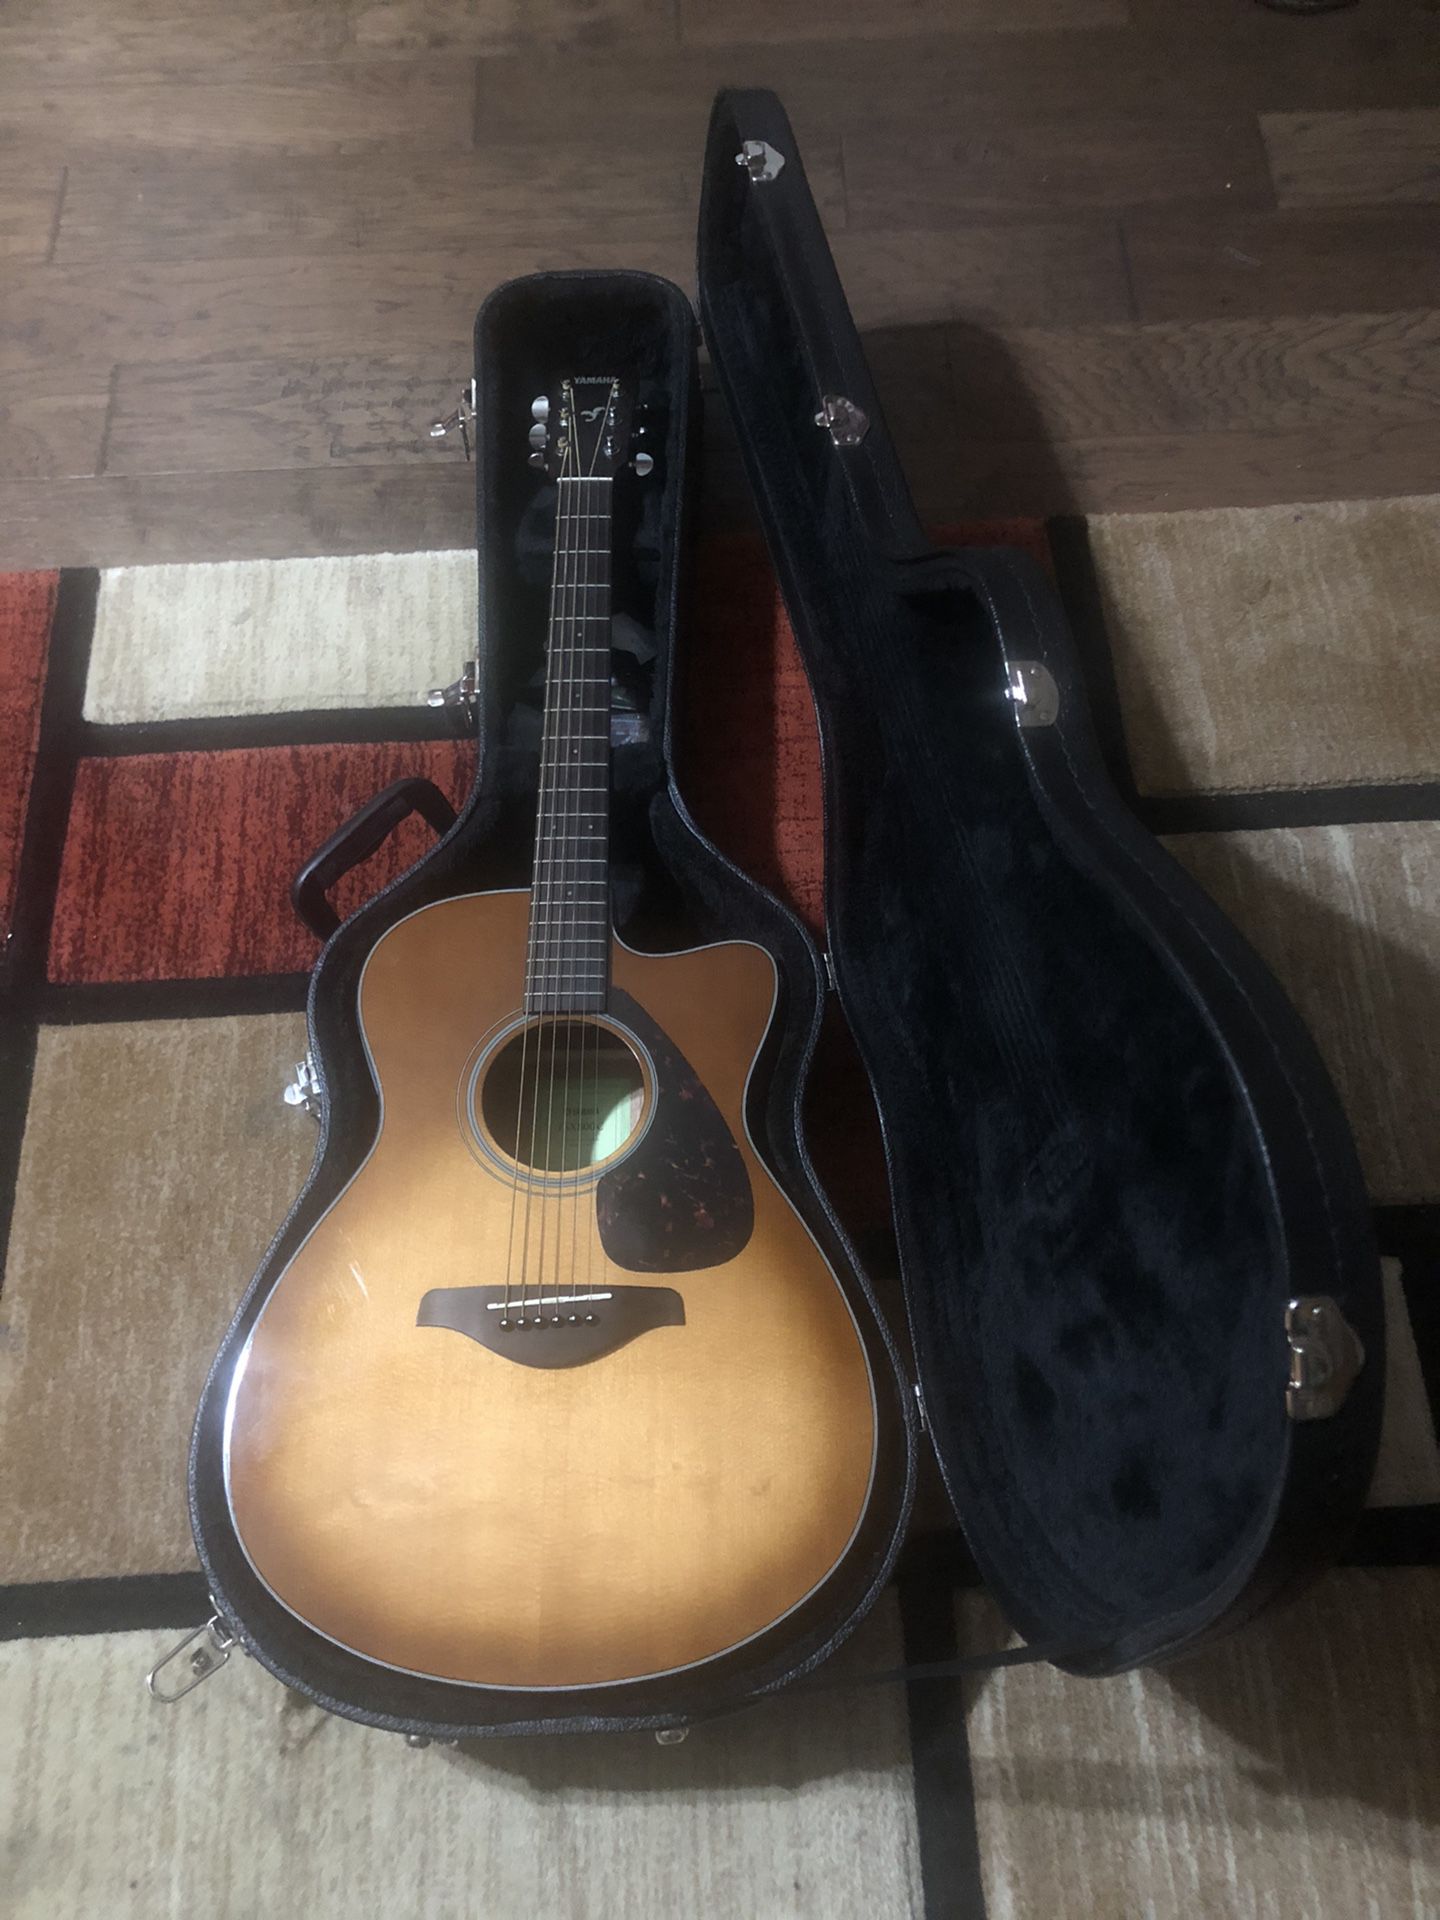 Acoustic electric guitar (just the guitar)